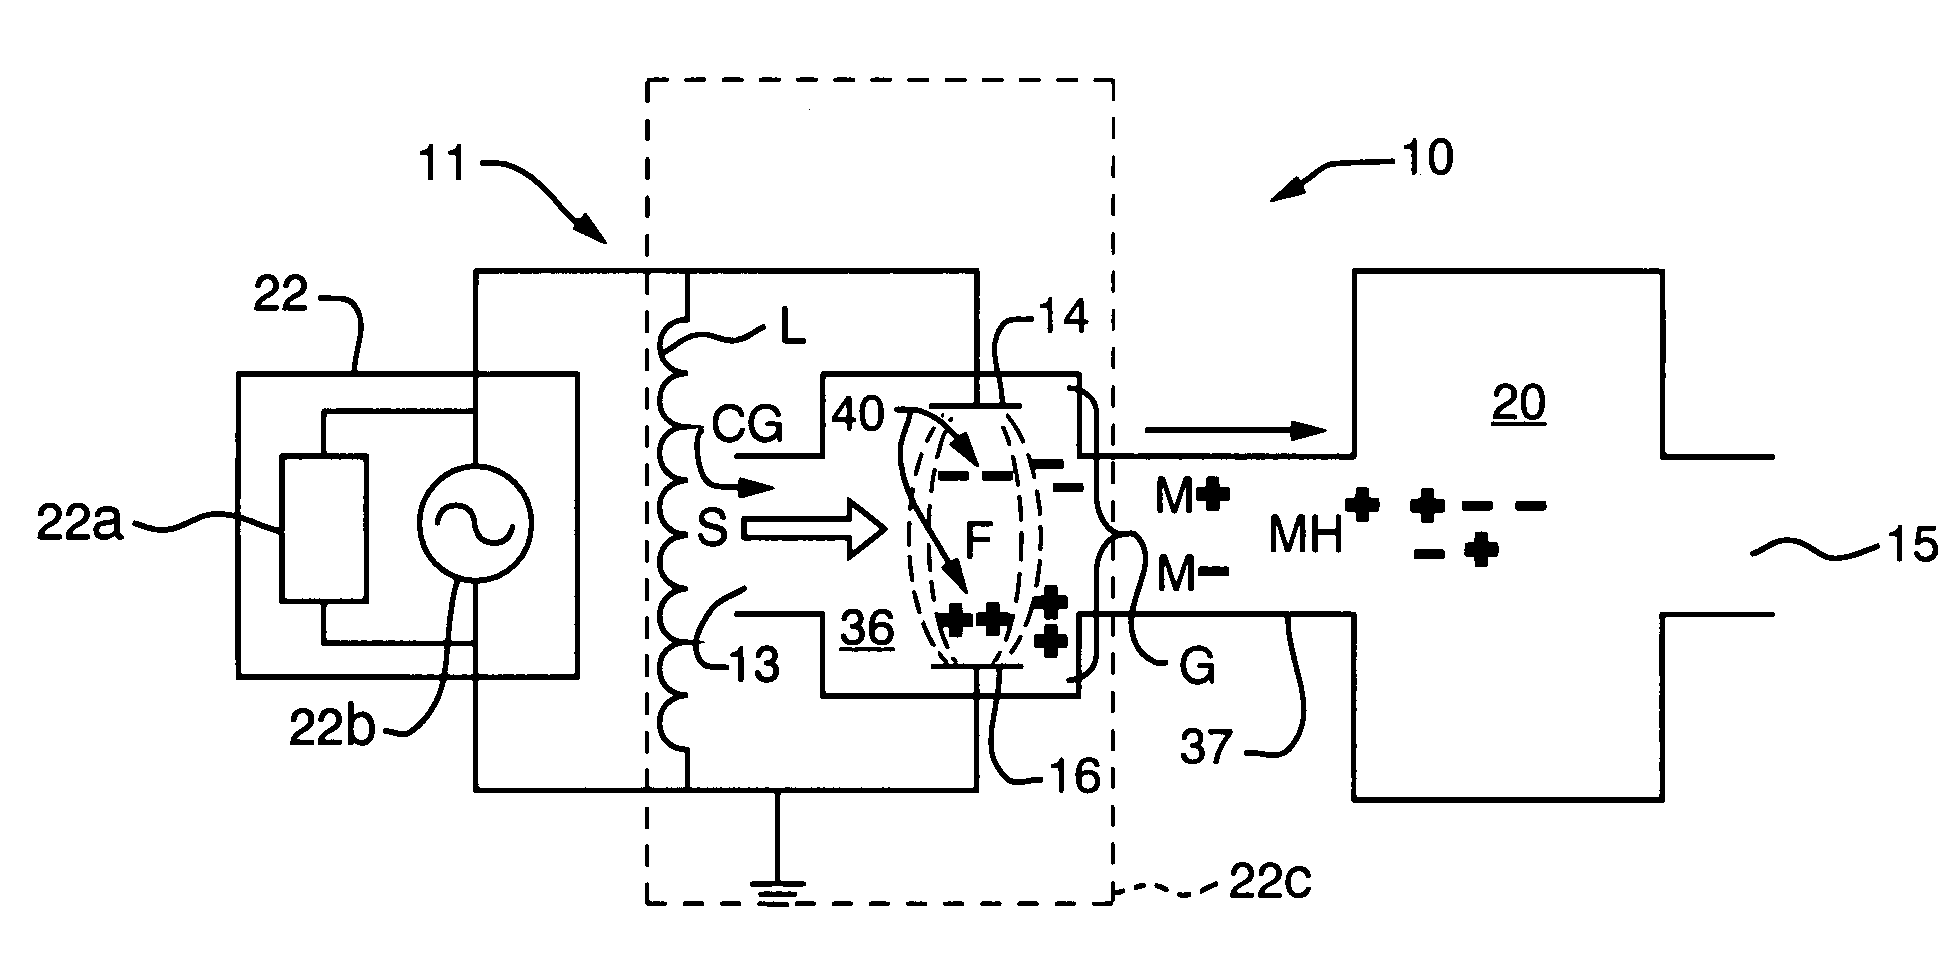 Capacitive discharge plasma ion source